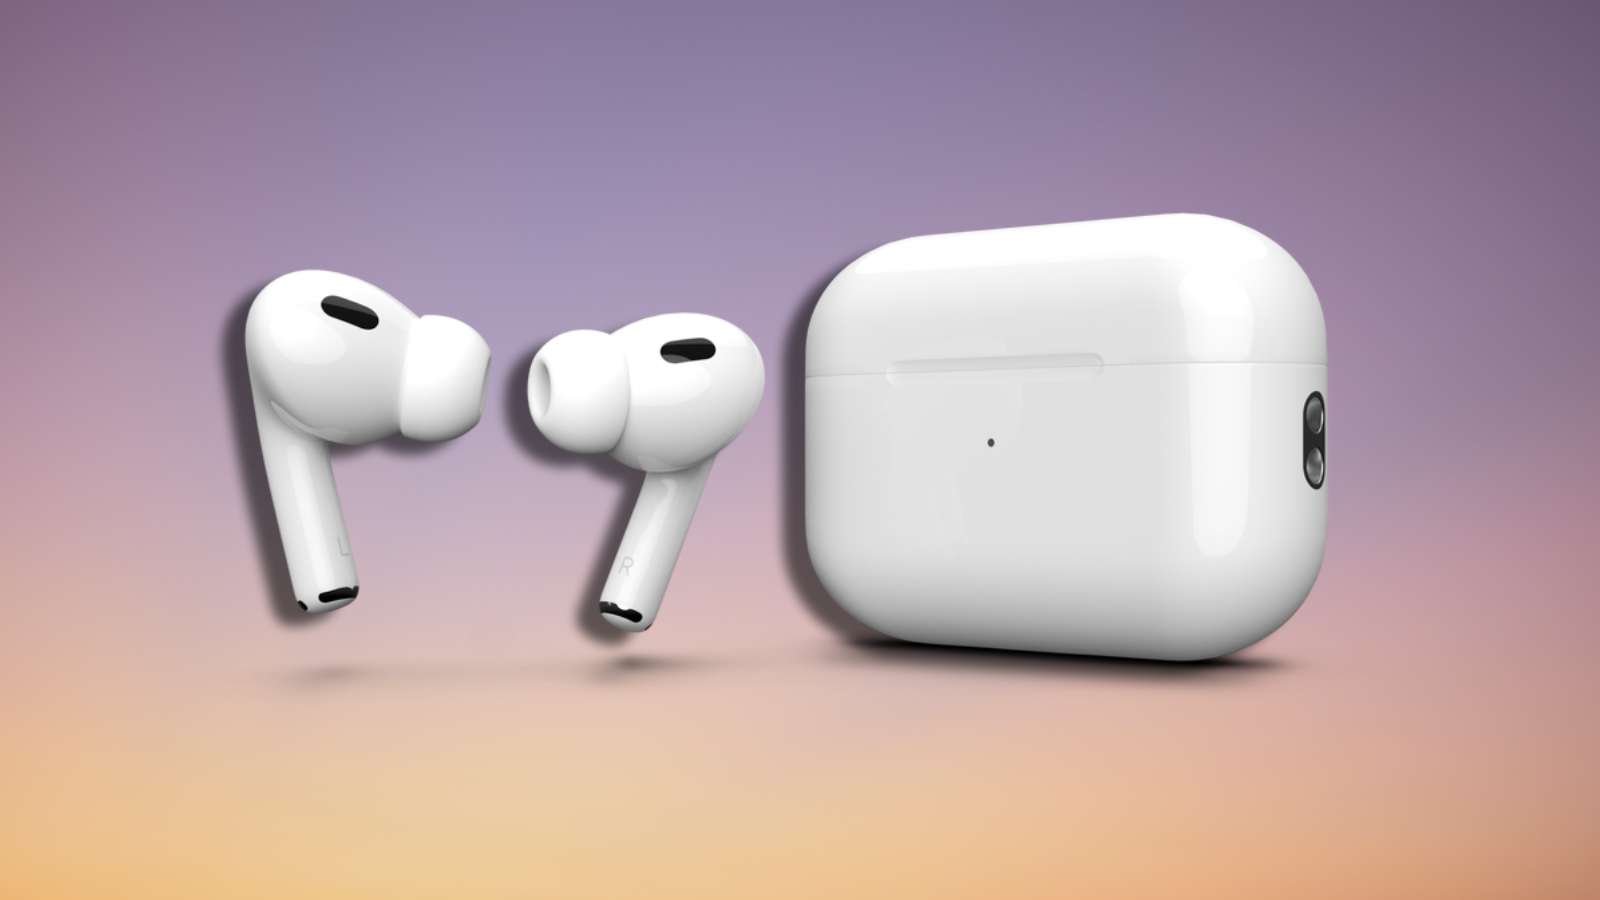 How to find my AirPods?